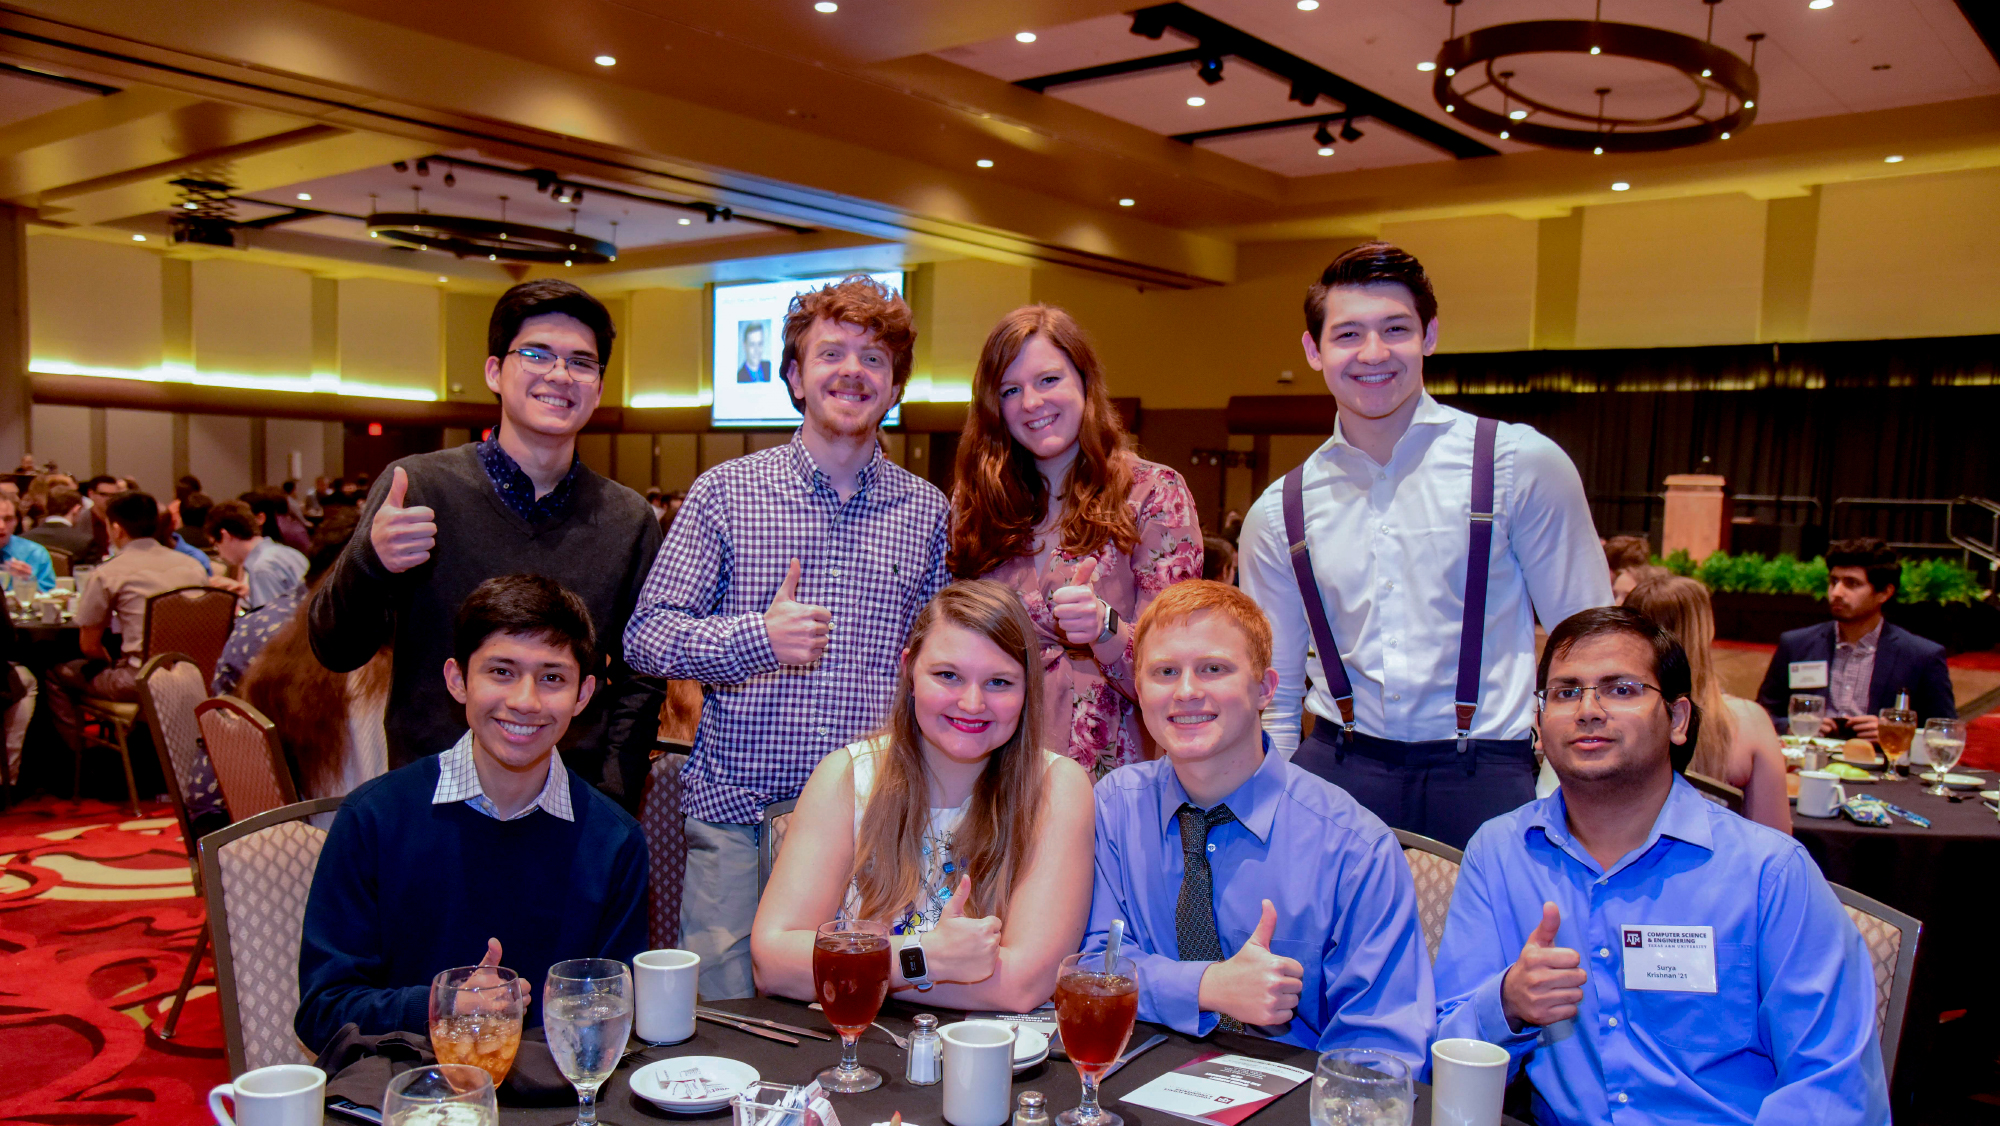 A group of students at the spring banquet dinner giving a Gig 'Em sign.